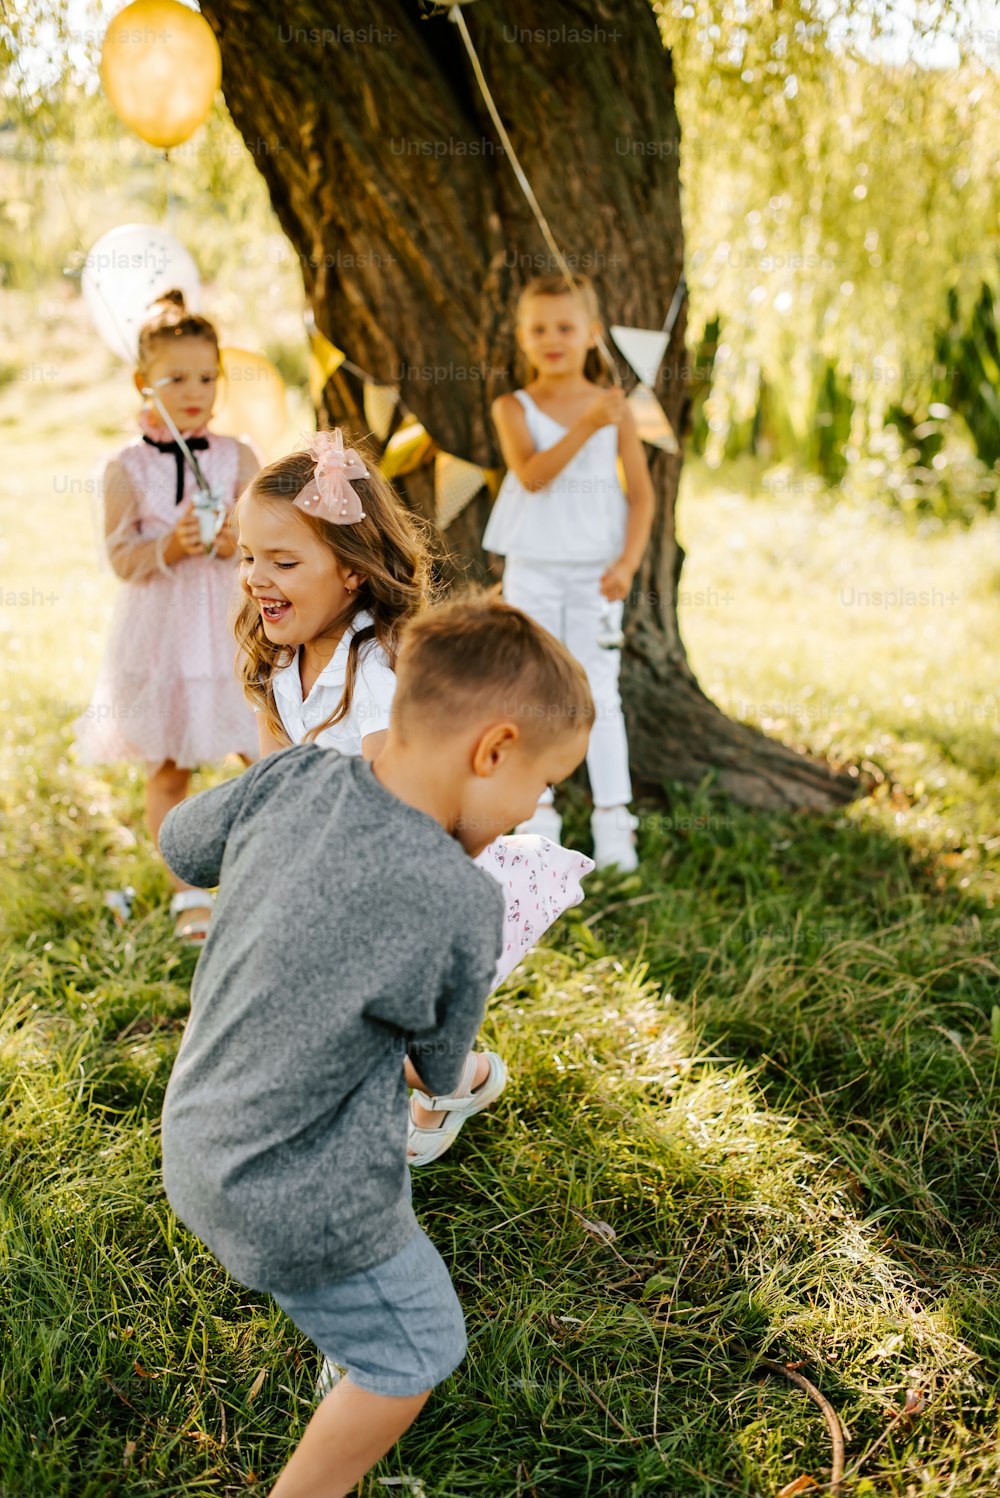 a group of young children standing next to a tree